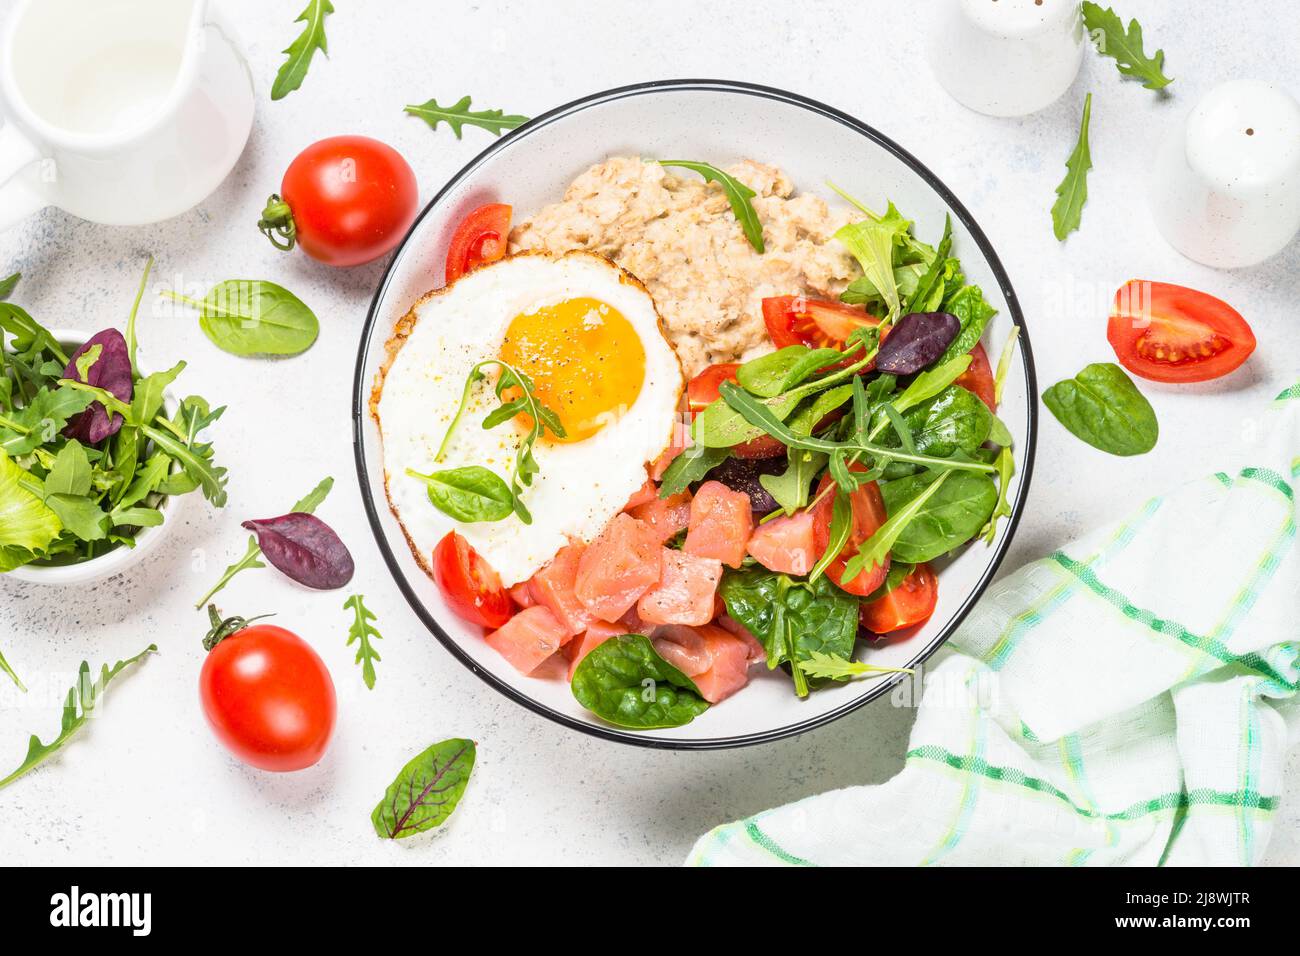 Savory breakfast with oatmeal, salmon and salad. Stock Photo